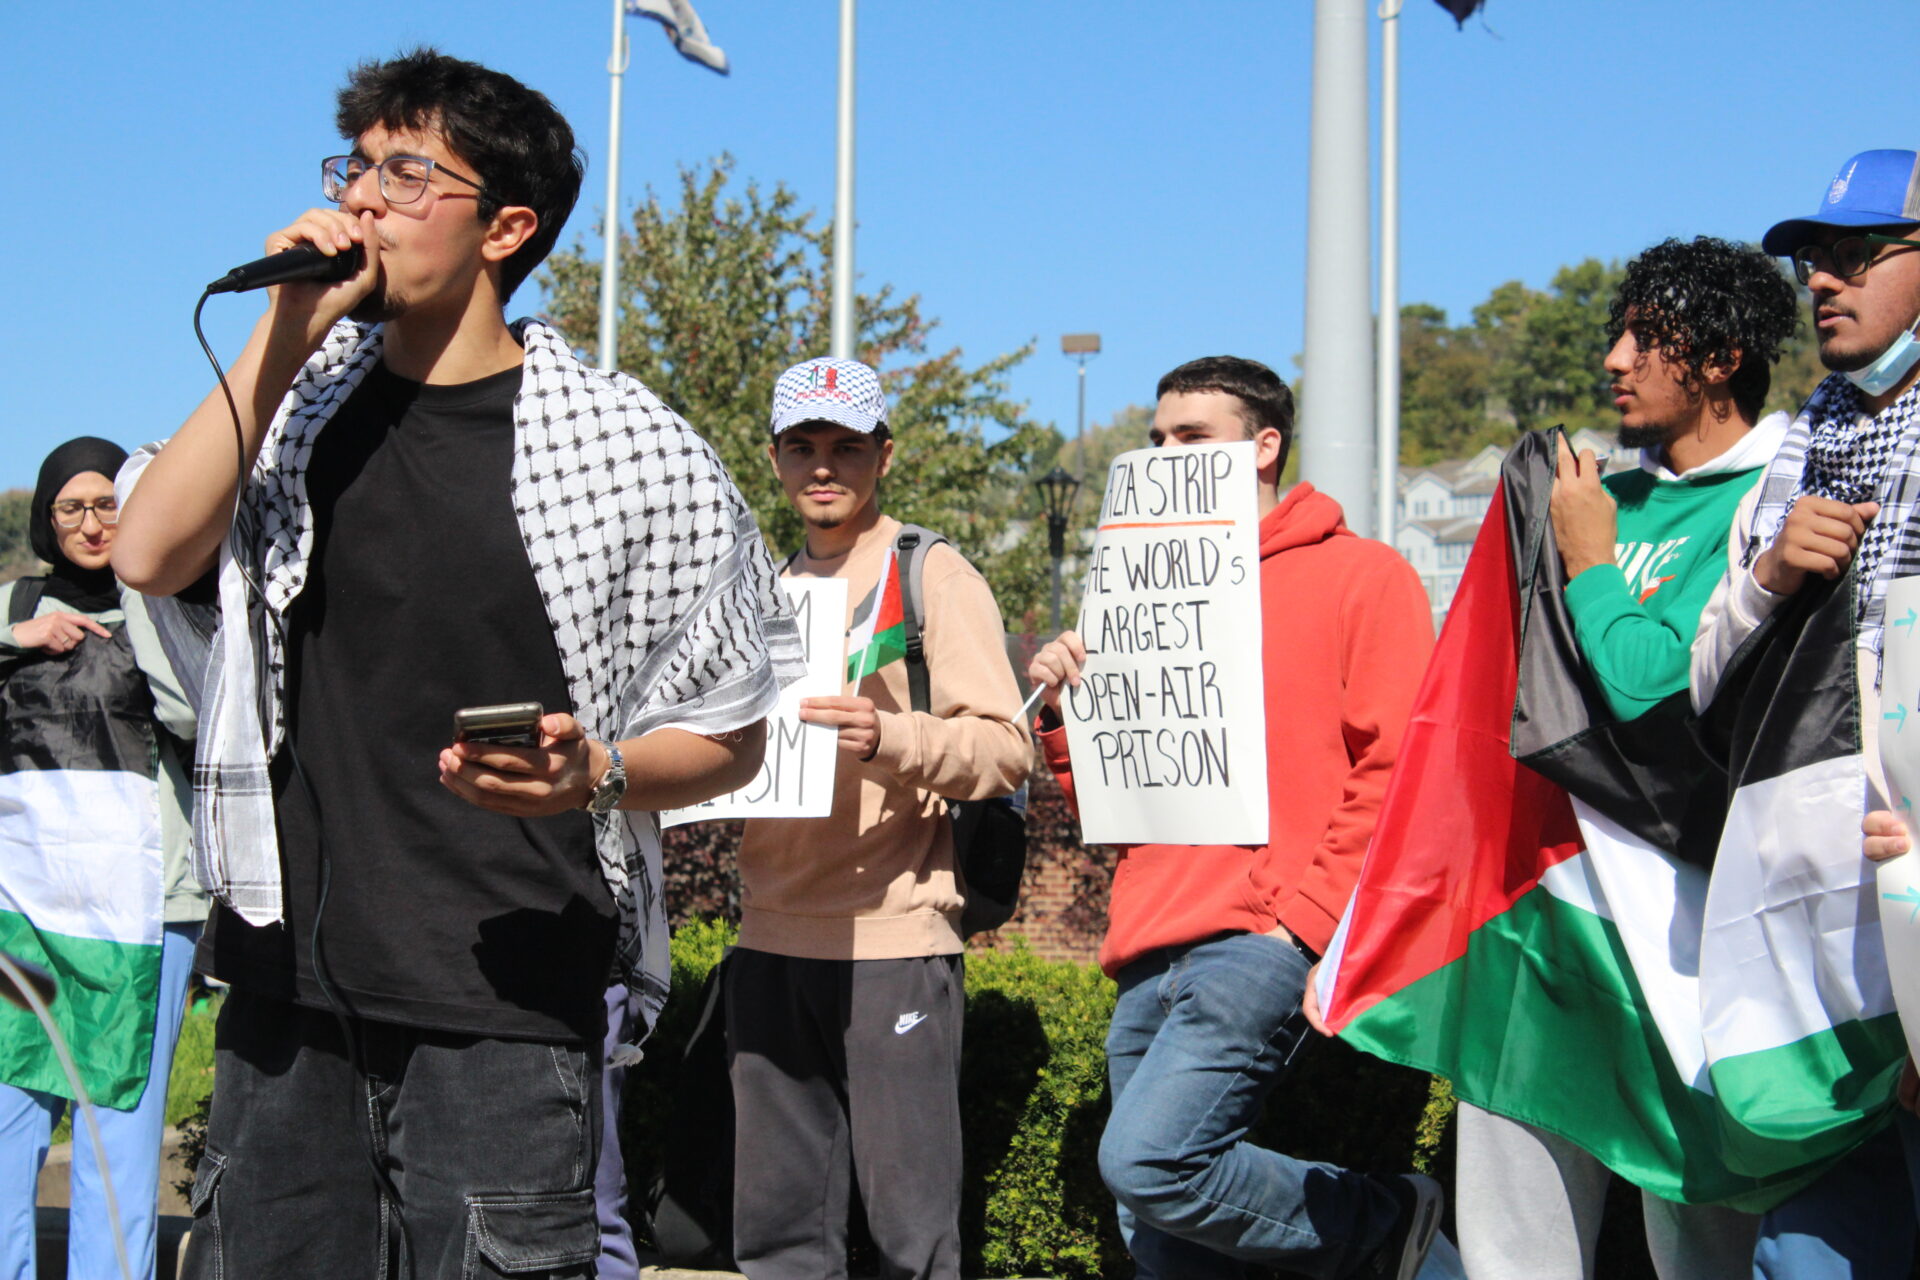 Update: WVU Students Show Support For Palestine With Rally